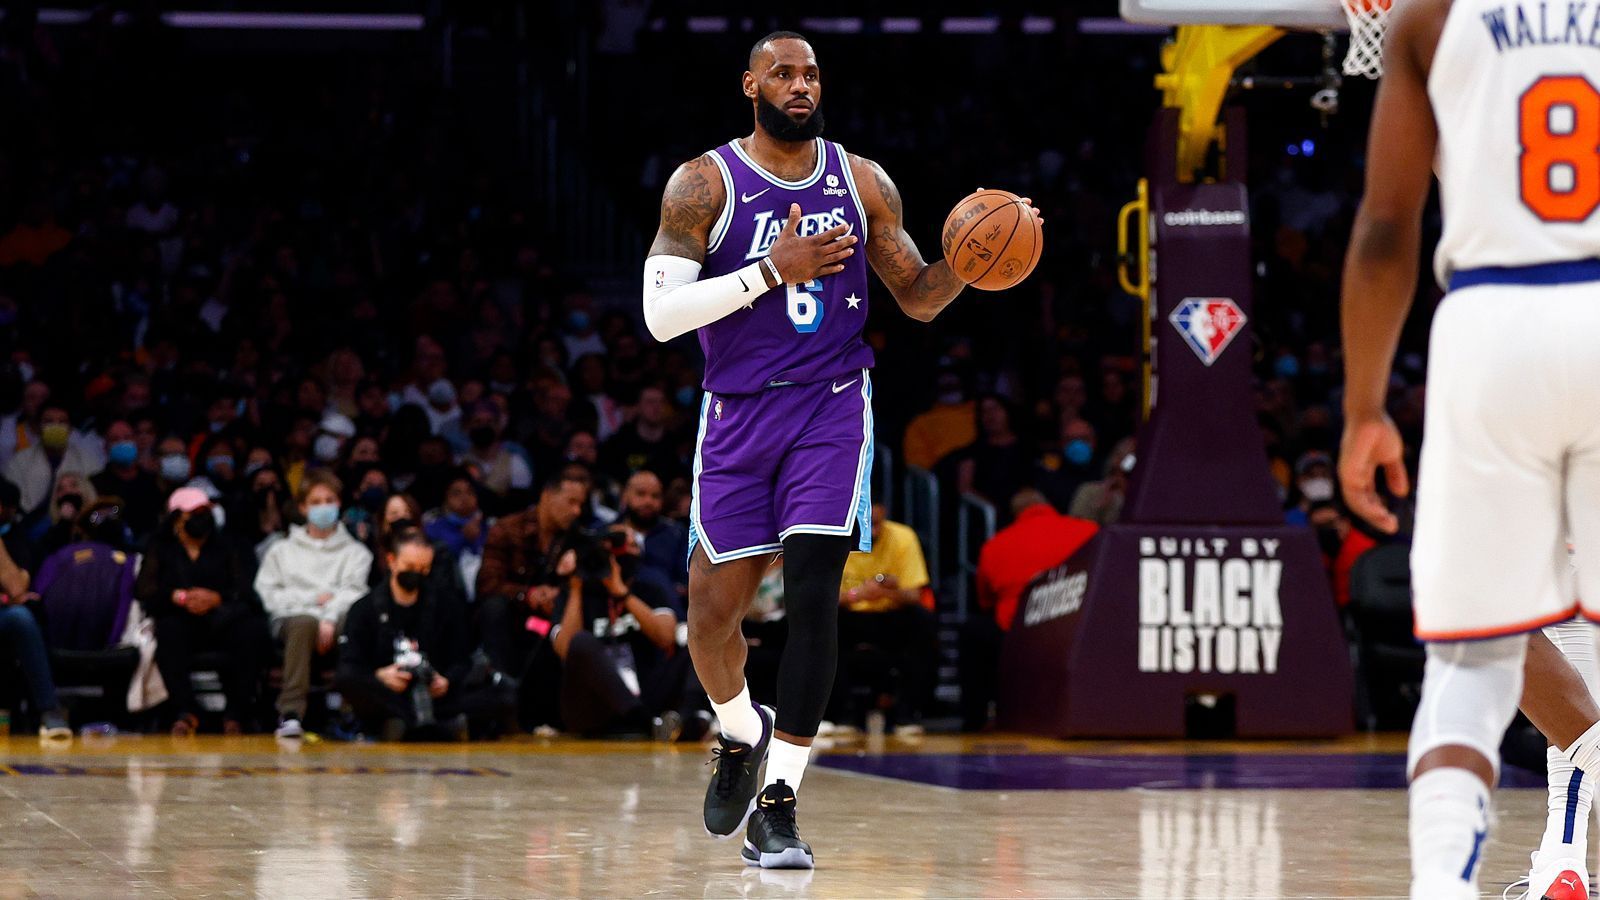 
                <strong>TEAM LEBRON: LeBron James (Los Angeles Lakers/Starter)</strong><br>
                &#x2022; Punkte: 29,0 -<br>&#x2022; Rebounds: 7,9 -<br>&#x2022; Assists: 6,5 -<br>&#x2022; All-Star Nominierungen: 18. <br>
              